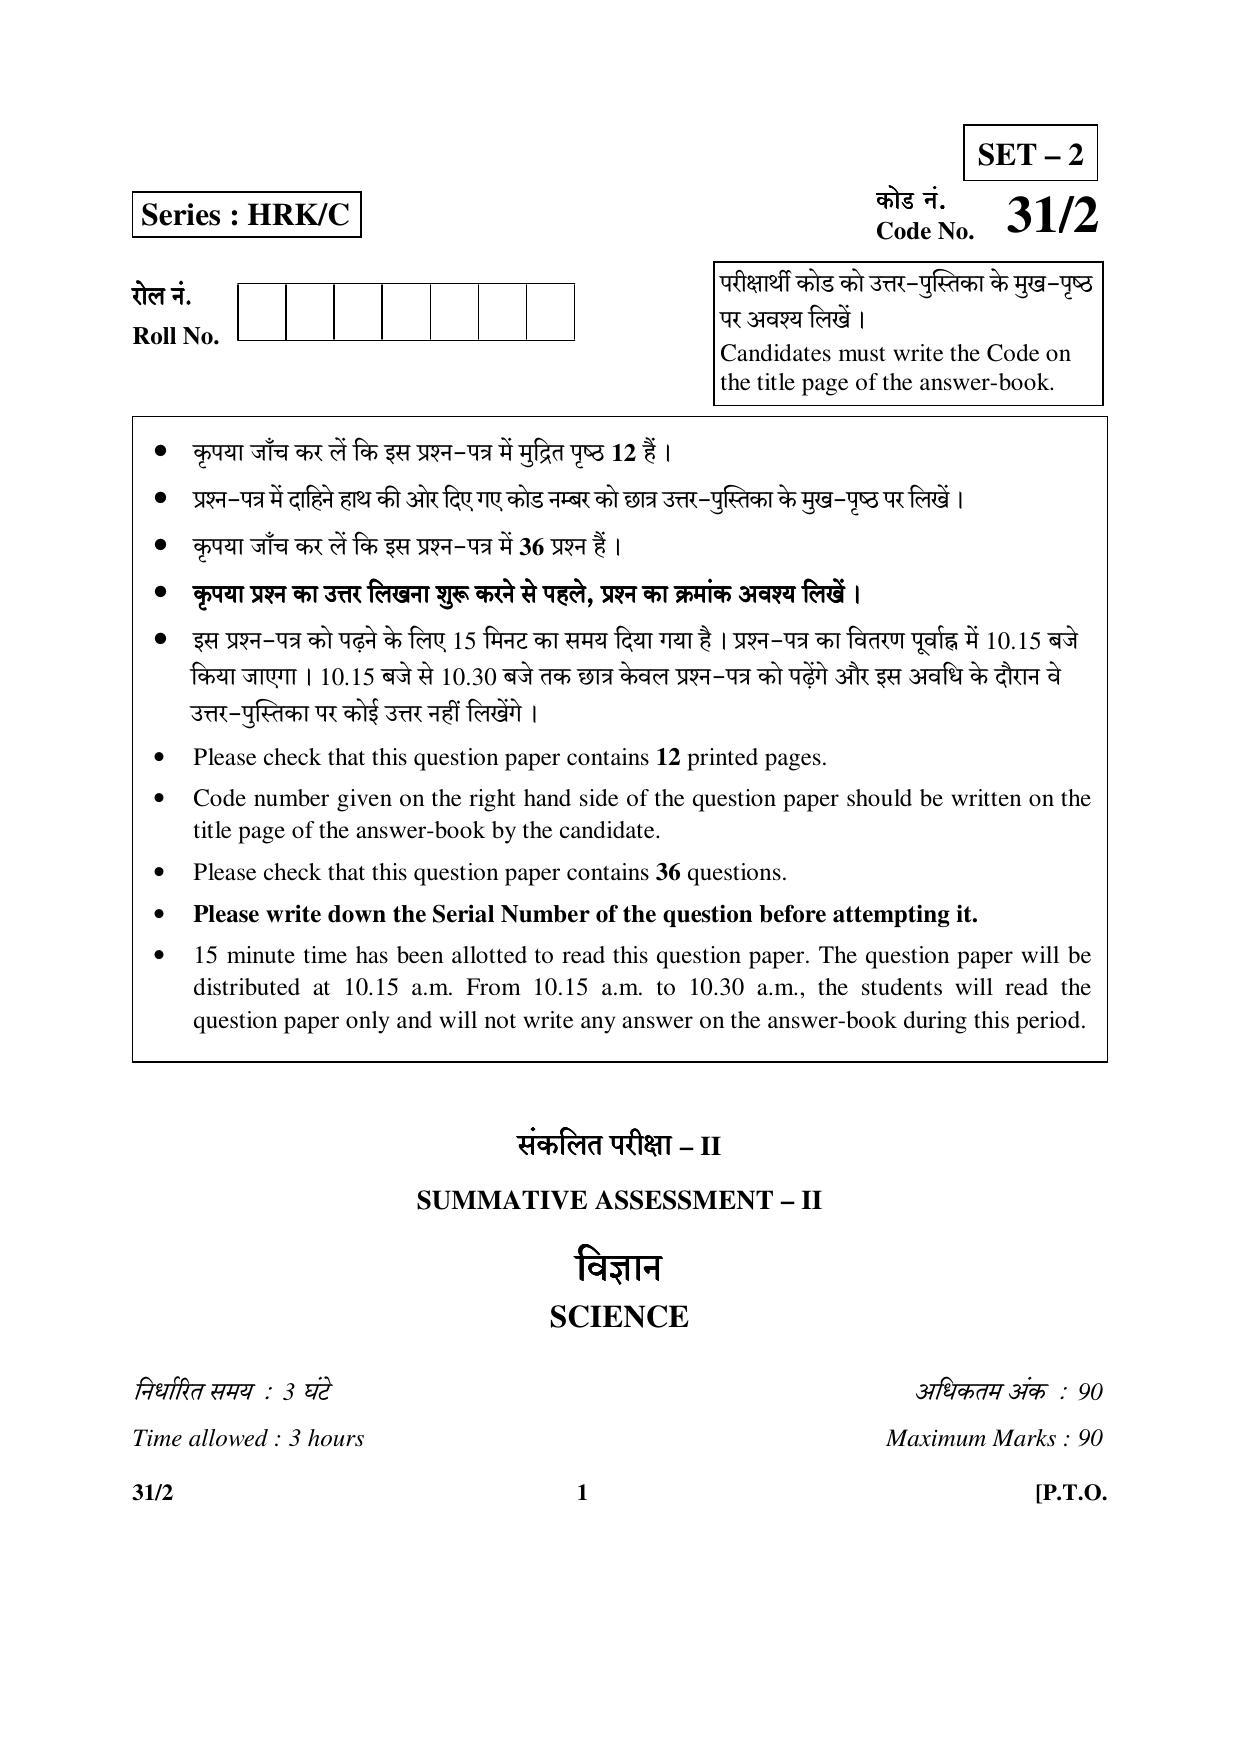 CBSE Class 10 31-2 (Science) 2017-comptt Question Paper - Page 1